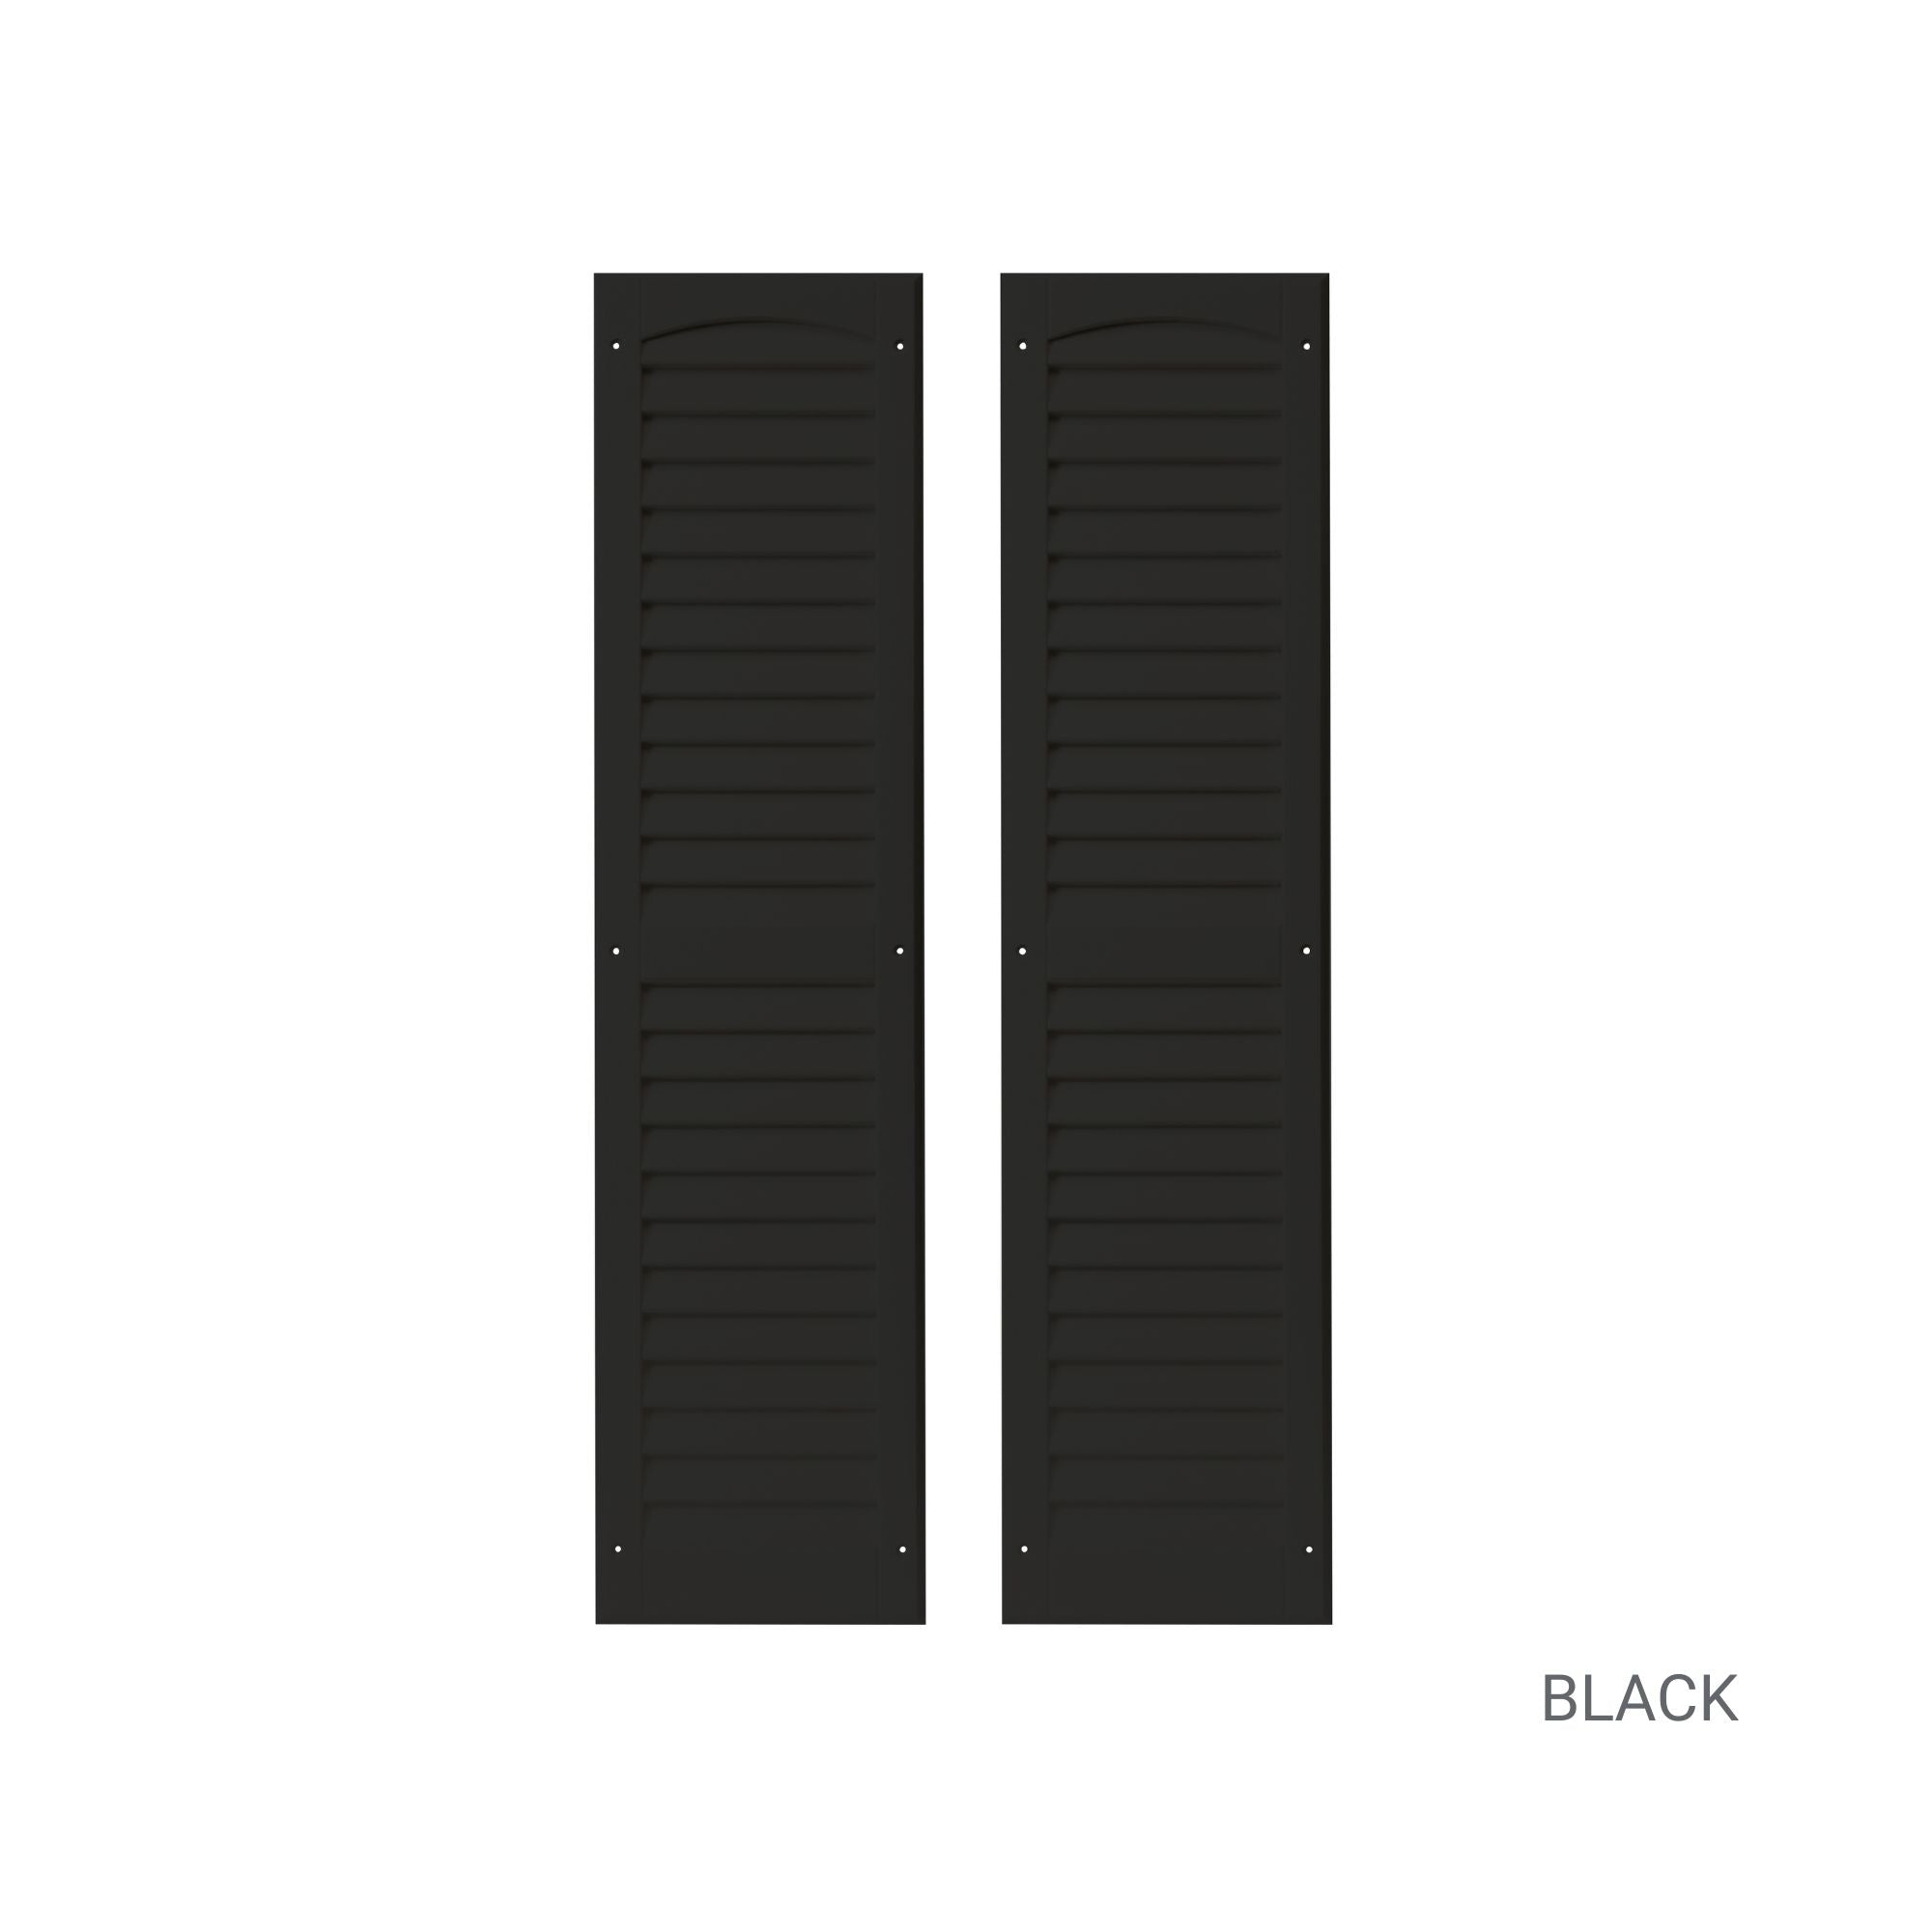 Pair of 9" W x 36" H Louvered Black Shutters for Sheds, Playhouses, and MORE